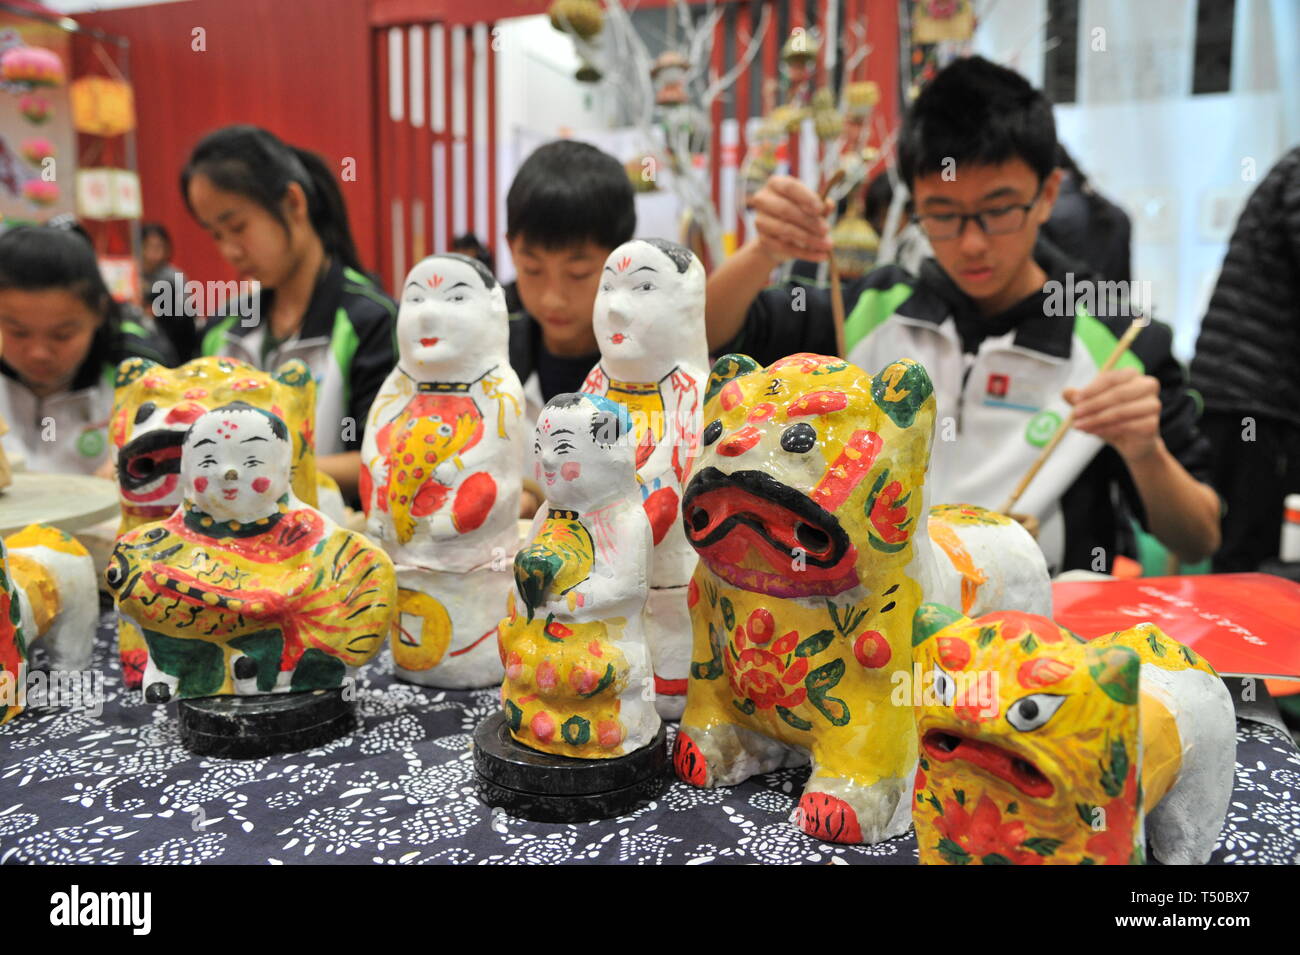 Weifang. 19th Apr, 2019. Photo taken on April 19, 2019 shows the clay sculpture works during the 4th China (Weifang) folk art fair in Weifang, east China's Shandong Province. The 4th China (Weifang) folk art fair kicked off here on Friday. More than 50 categories of folk art were displayed and visitors could have a try at the interactive exhibition area. Credit: Shao Kun/Xinhua/Alamy Live News Stock Photo